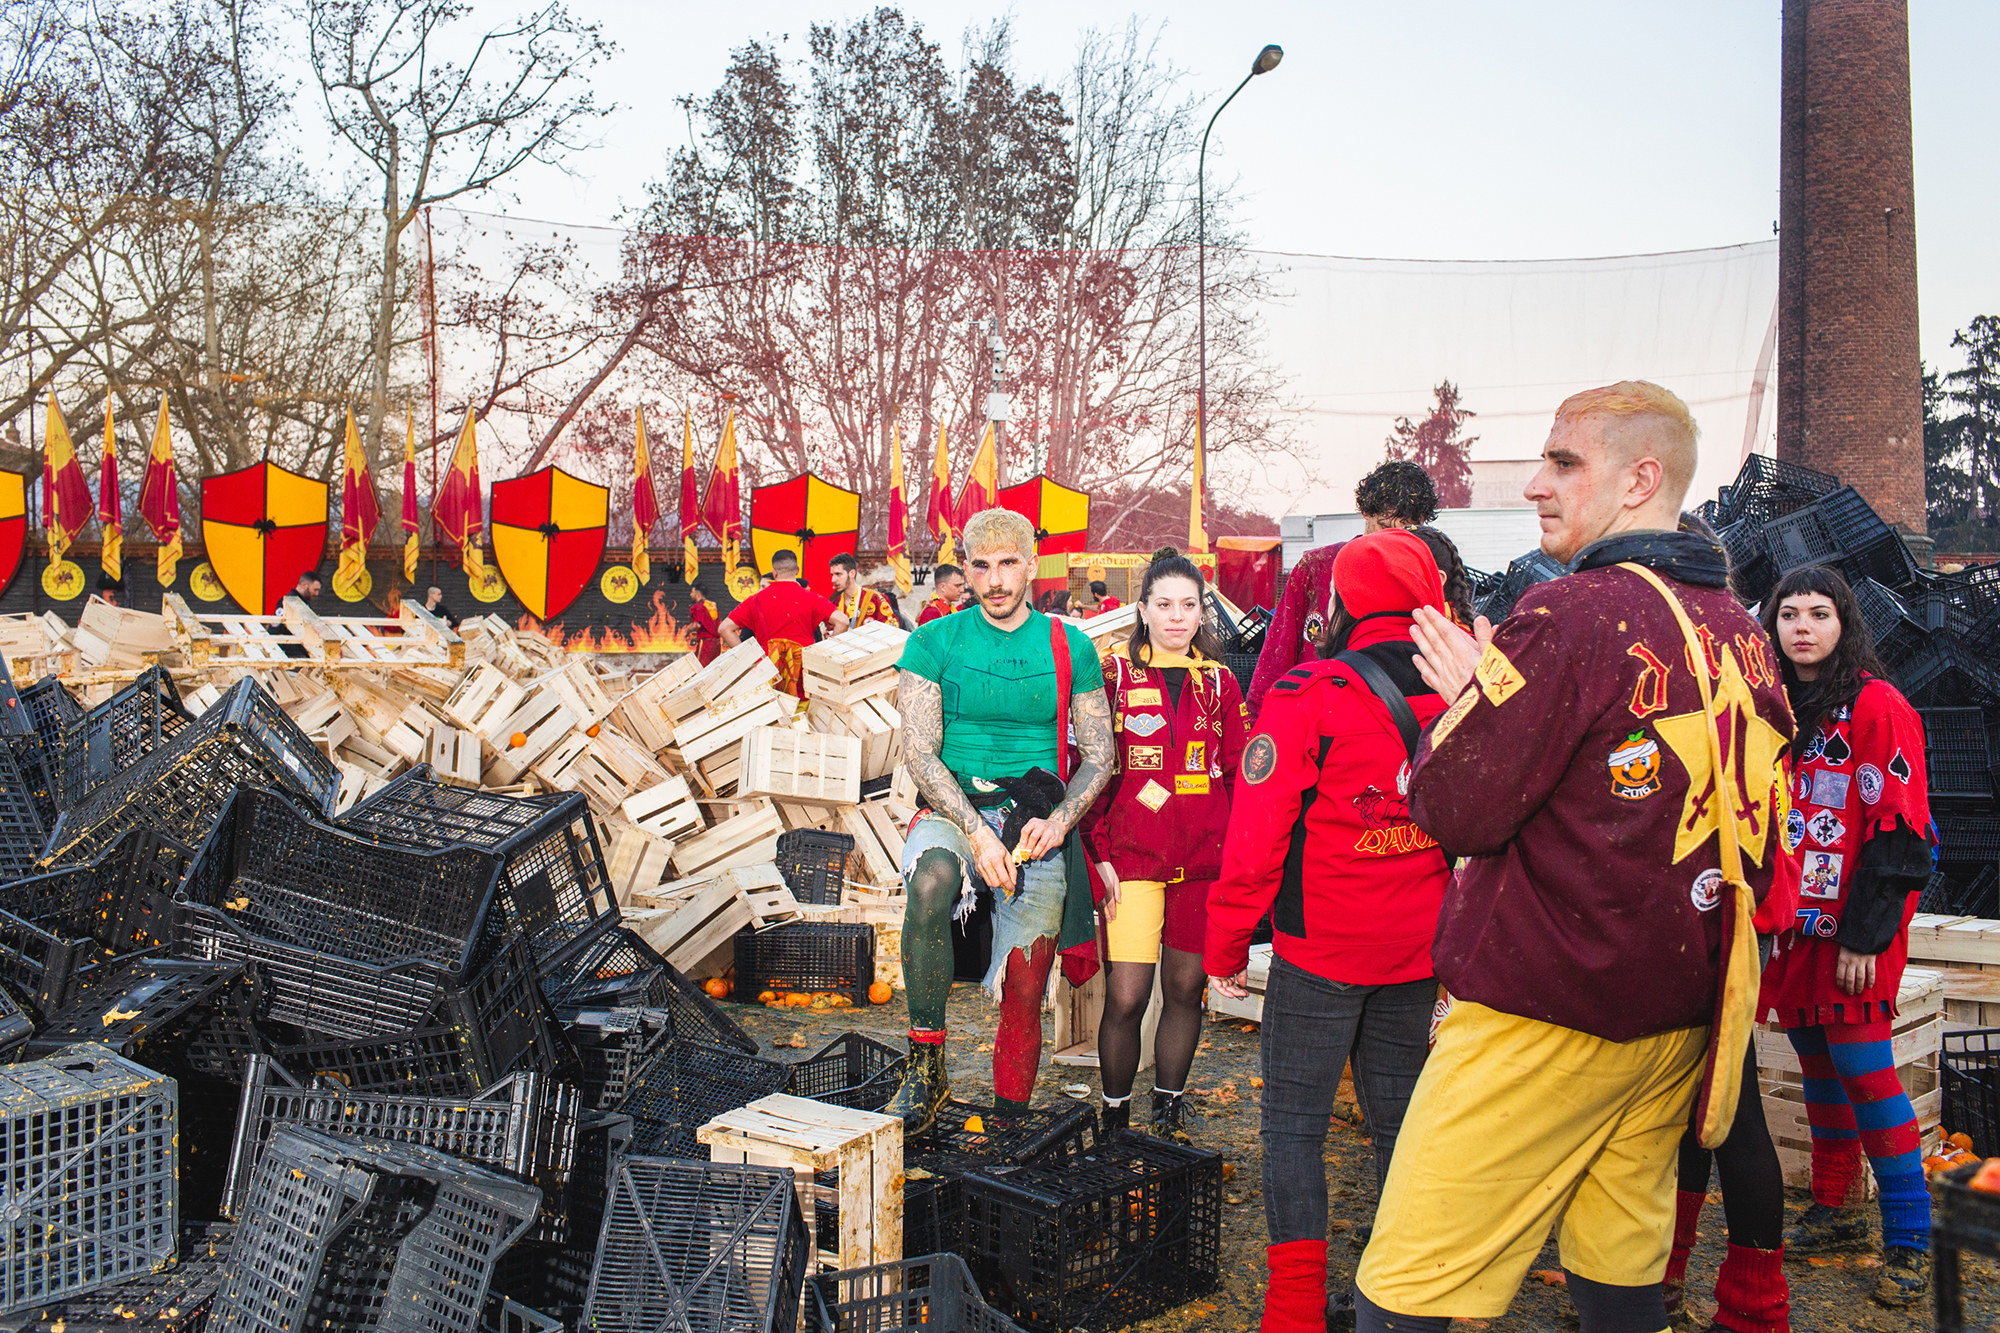 People, messy with debris after the event, stand beside piles of different plastic and wooden crates